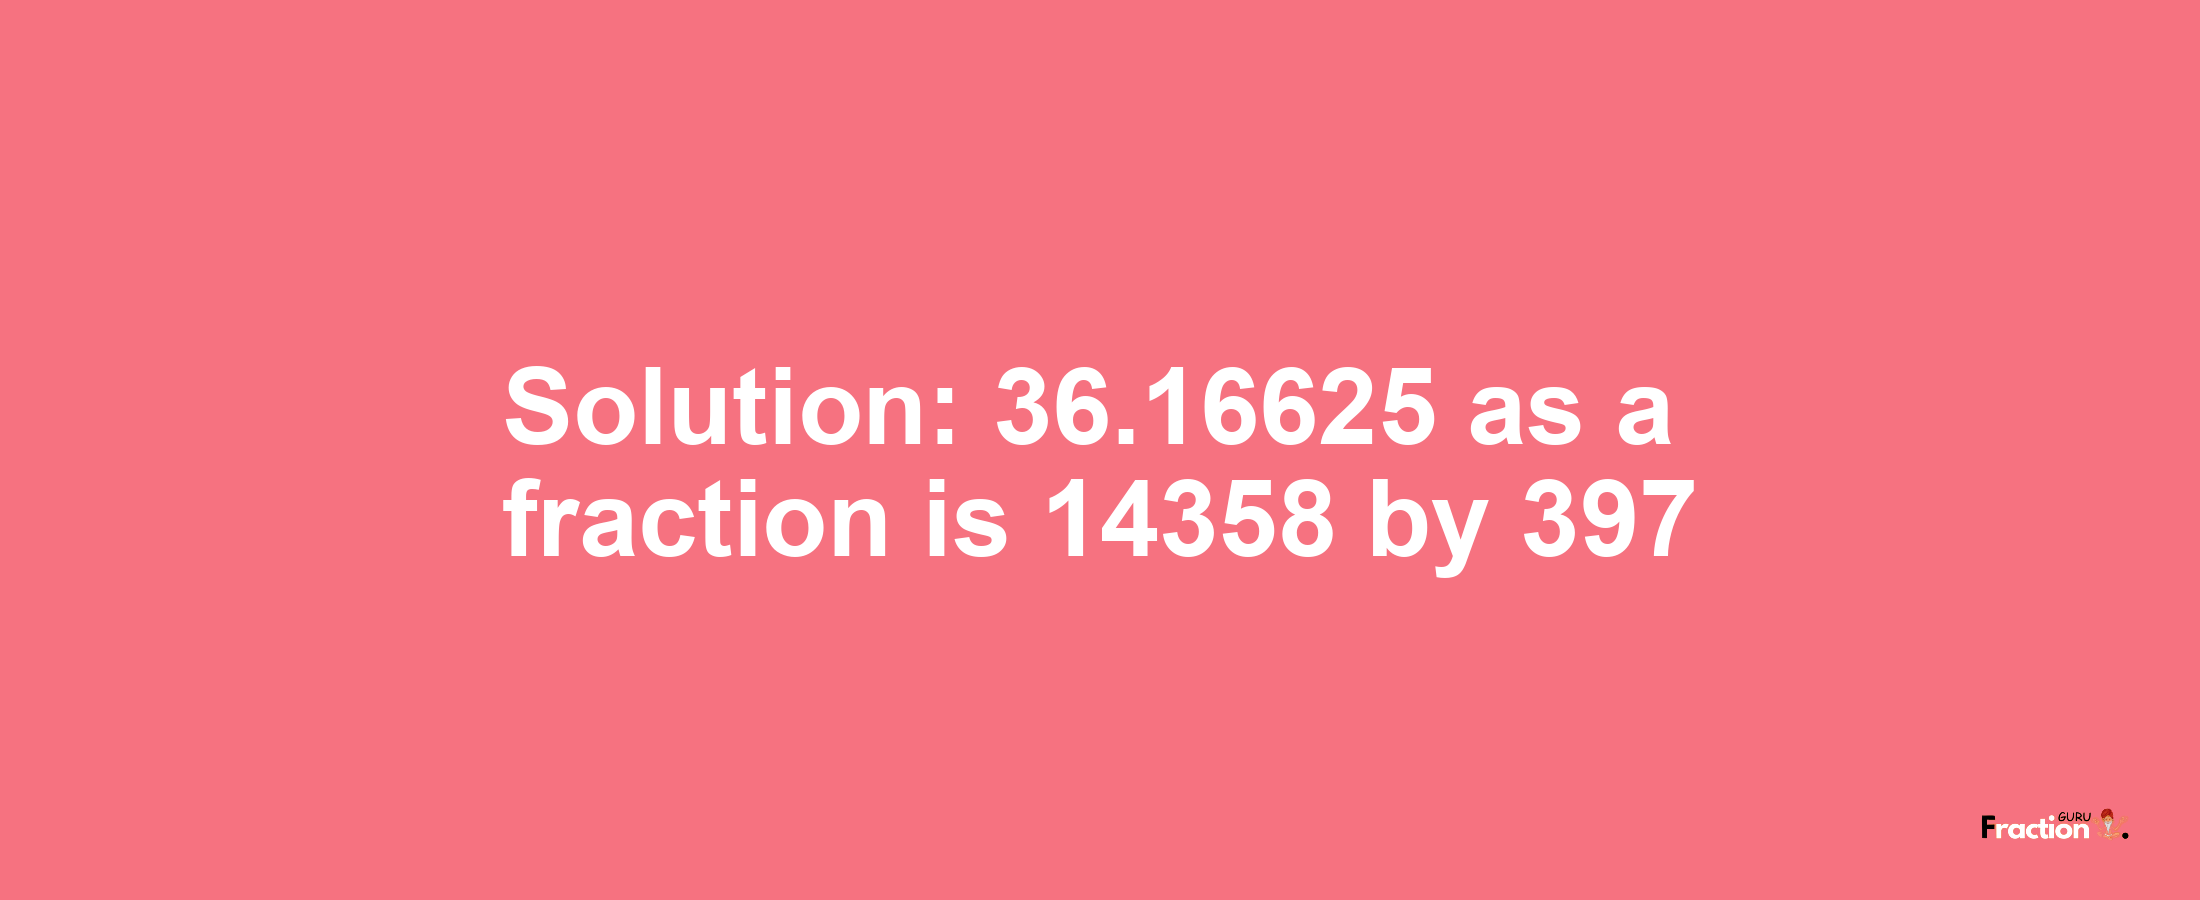 Solution:36.16625 as a fraction is 14358/397